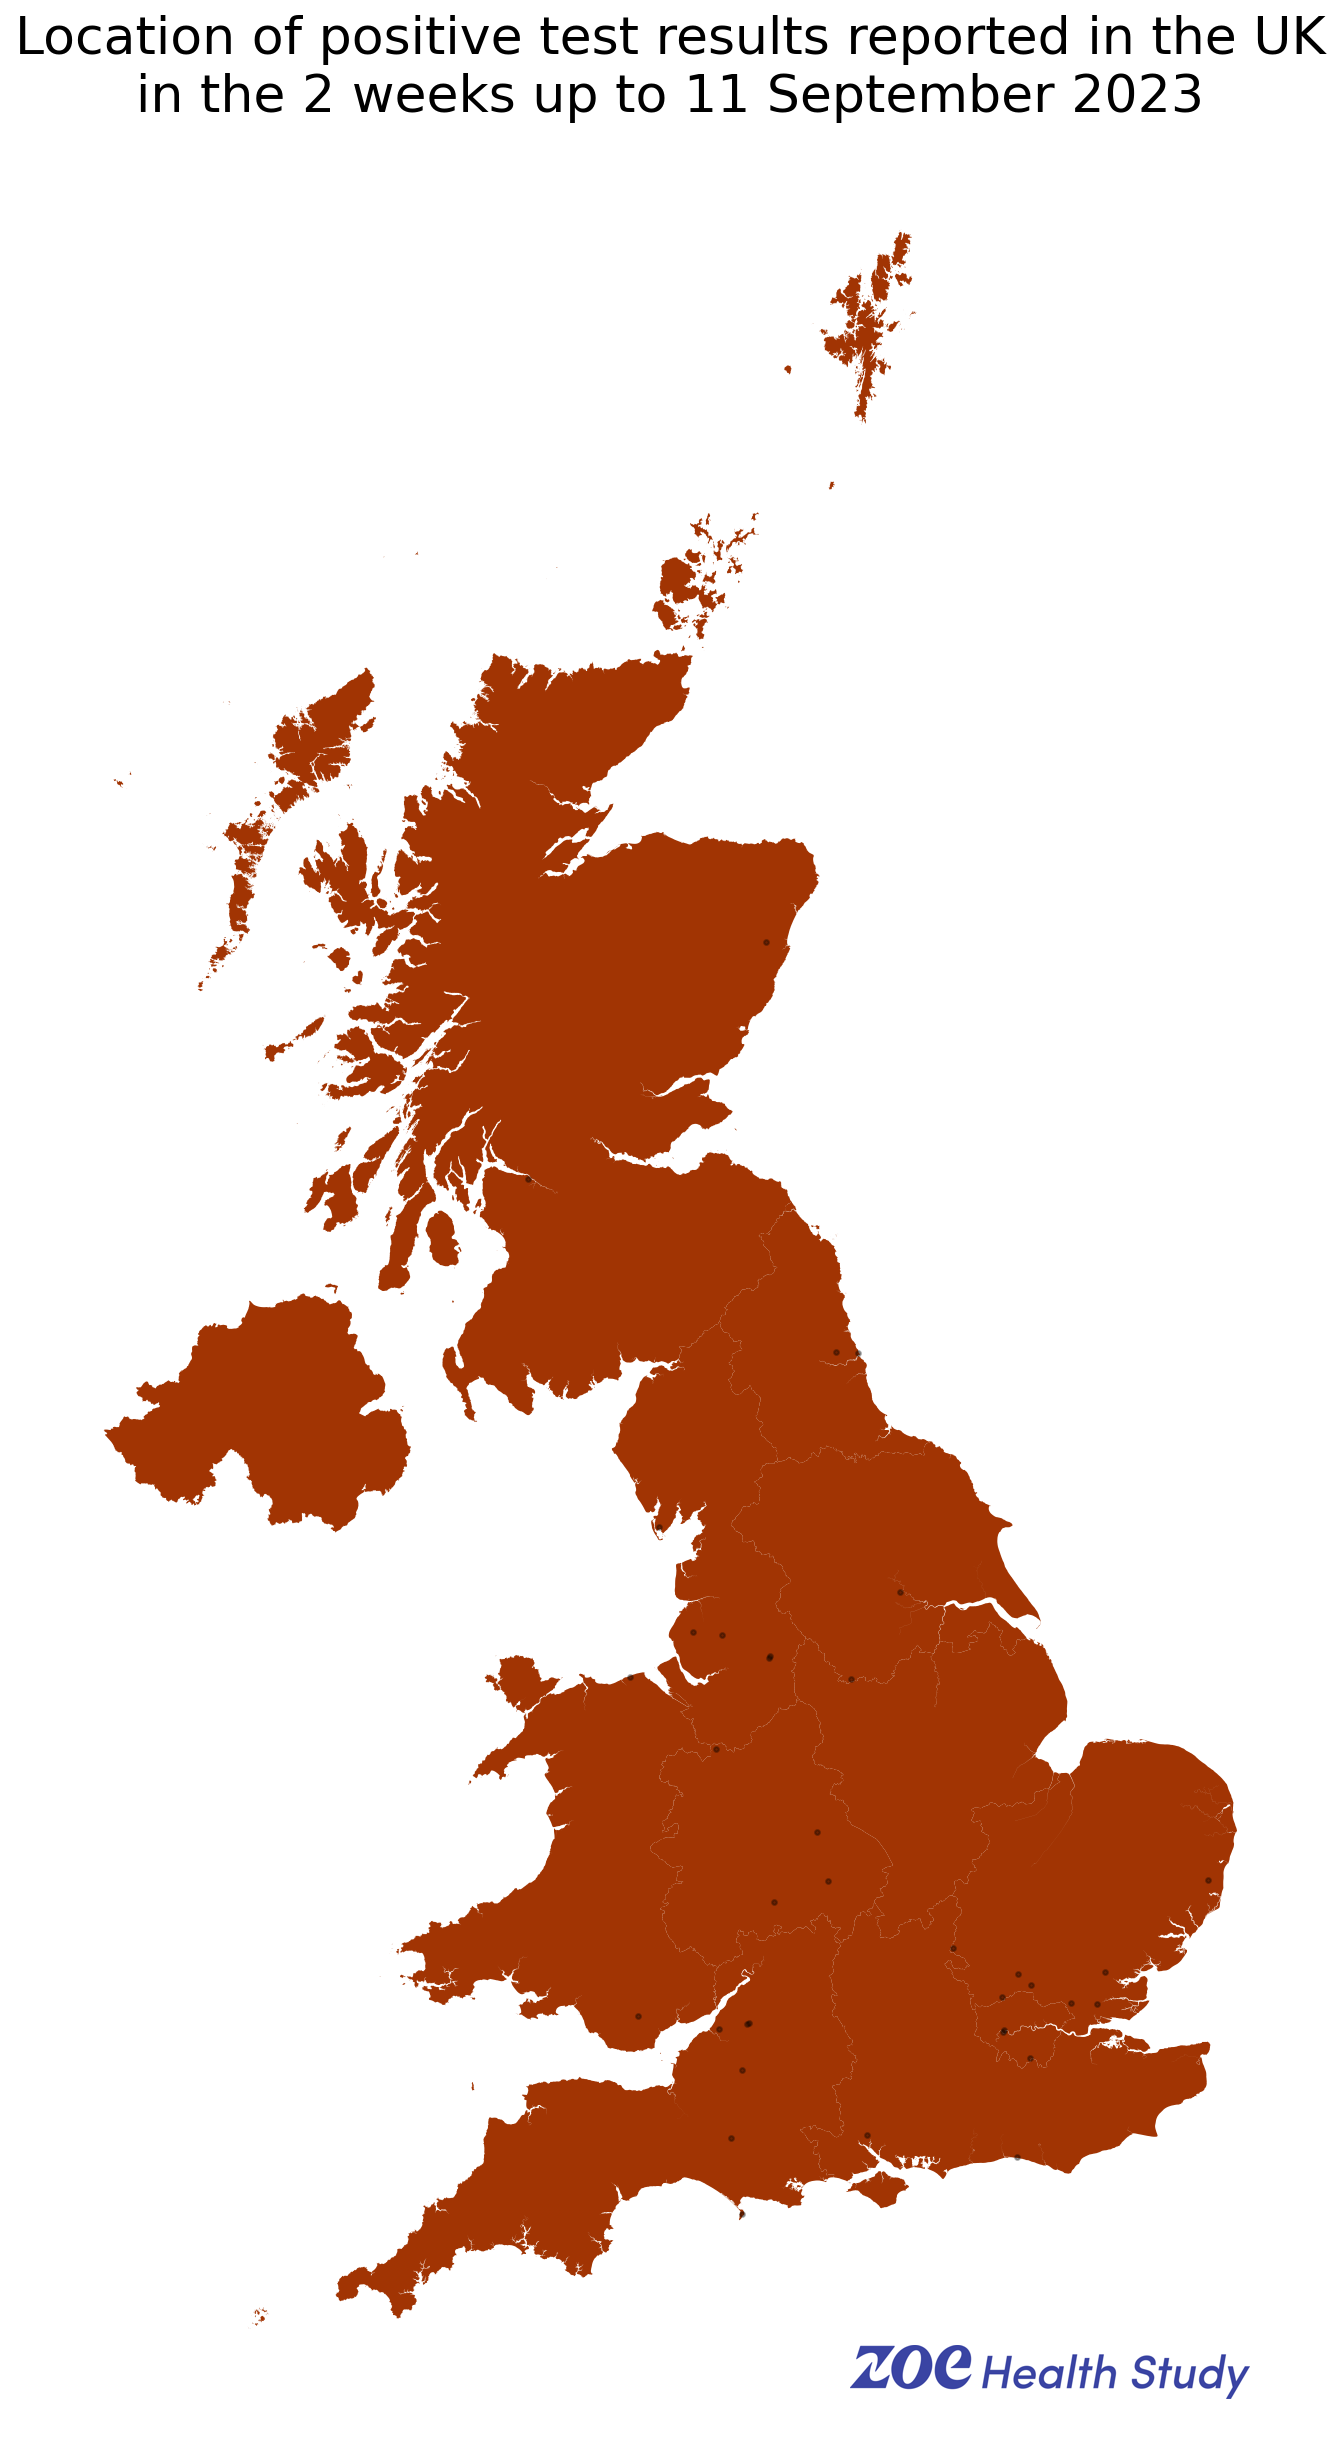 Location of positive COVID test results reported in the UK over last 2 weeks